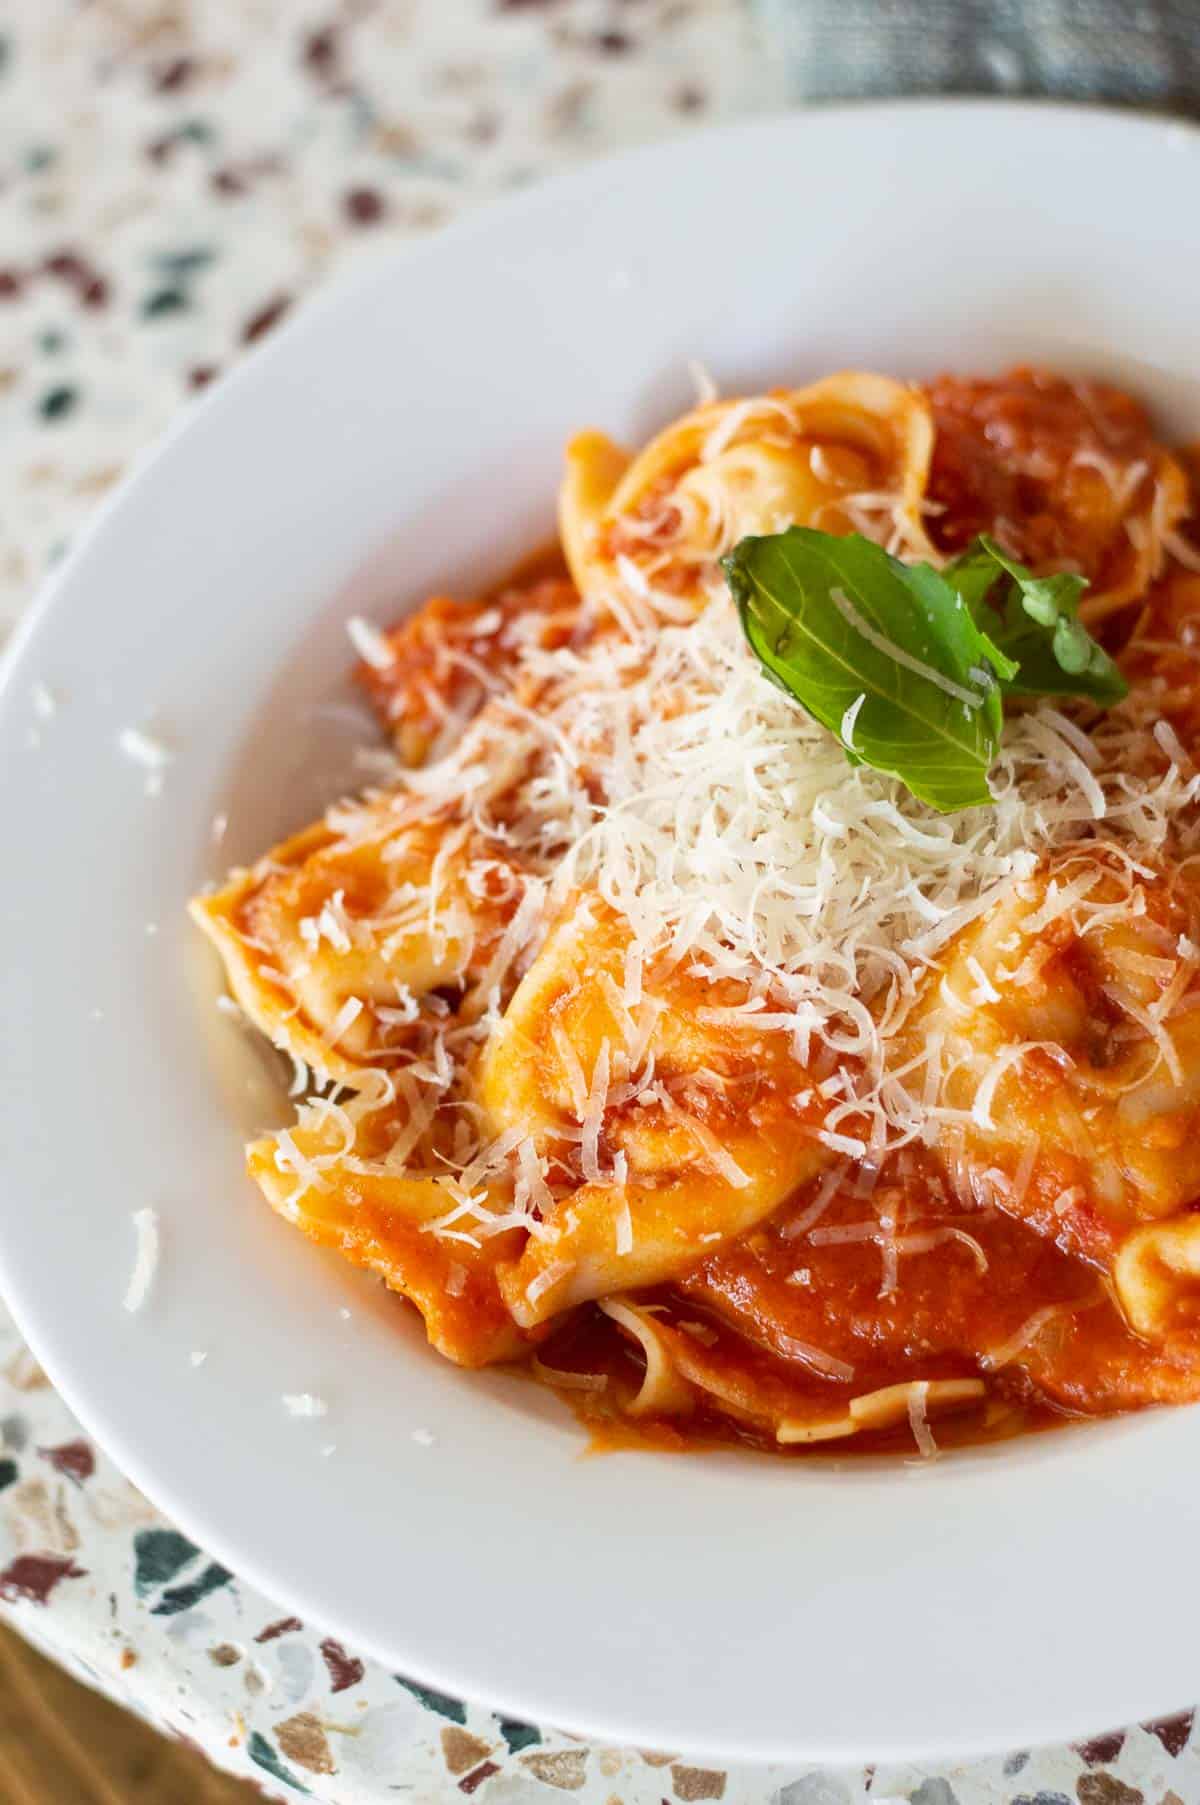 Tortellini Pomodoro is one of my favorite dinner recipes for a busy weeknight. Thi restaurant quality tortellini topped with homemade Pomodoro sauce is made in no time. 